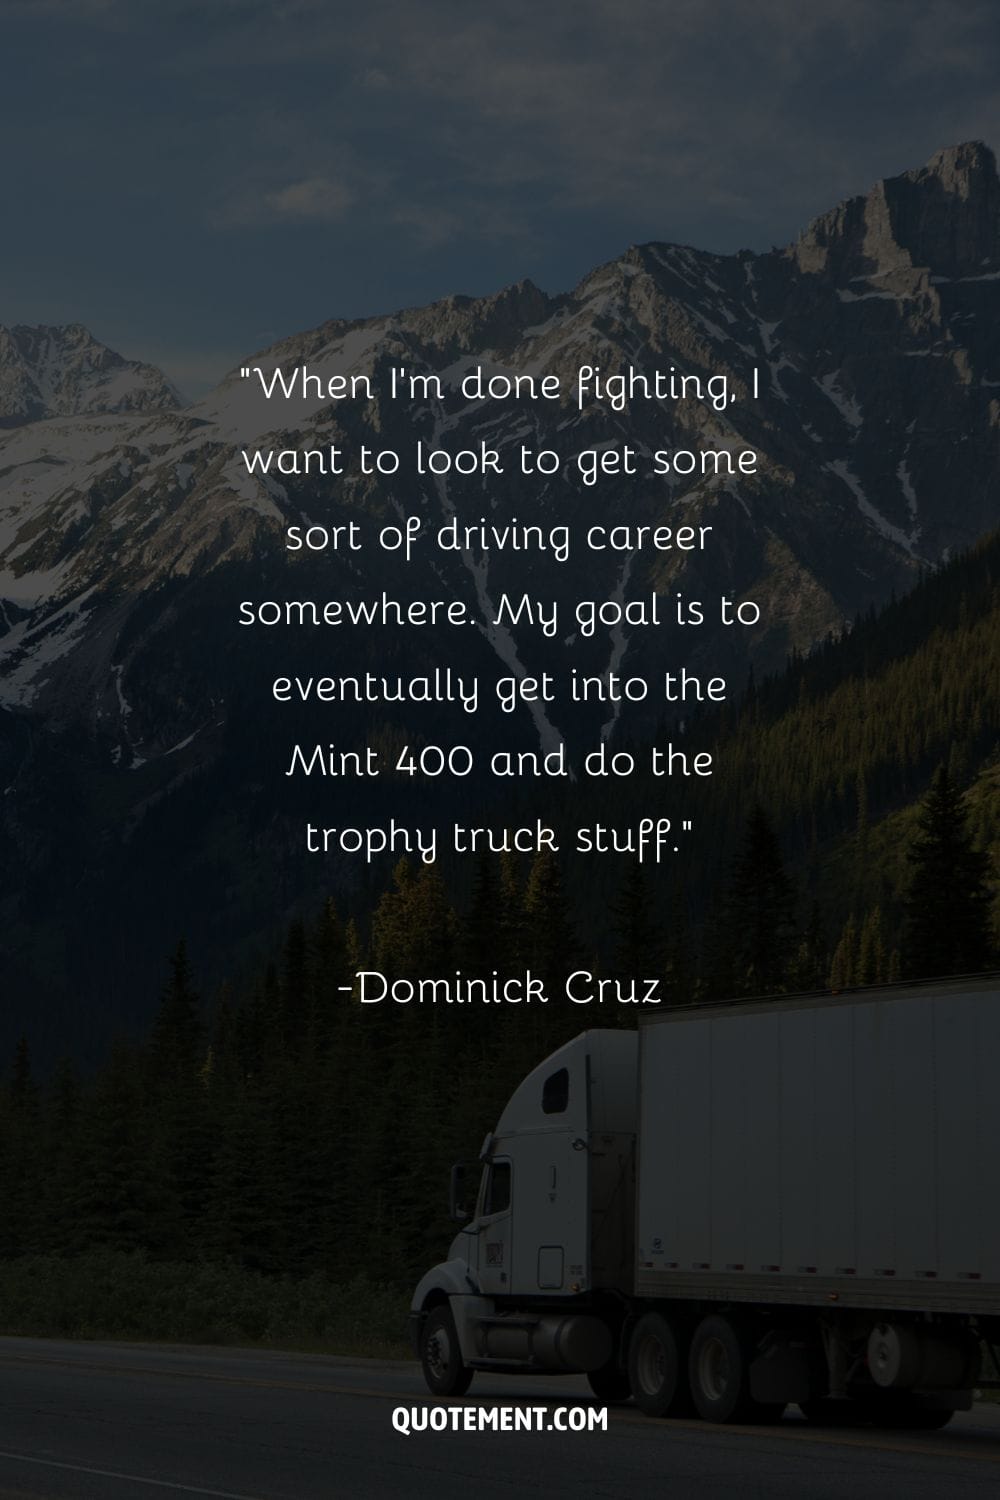 big truck driving on a mountain road representing inspiring trucking quote